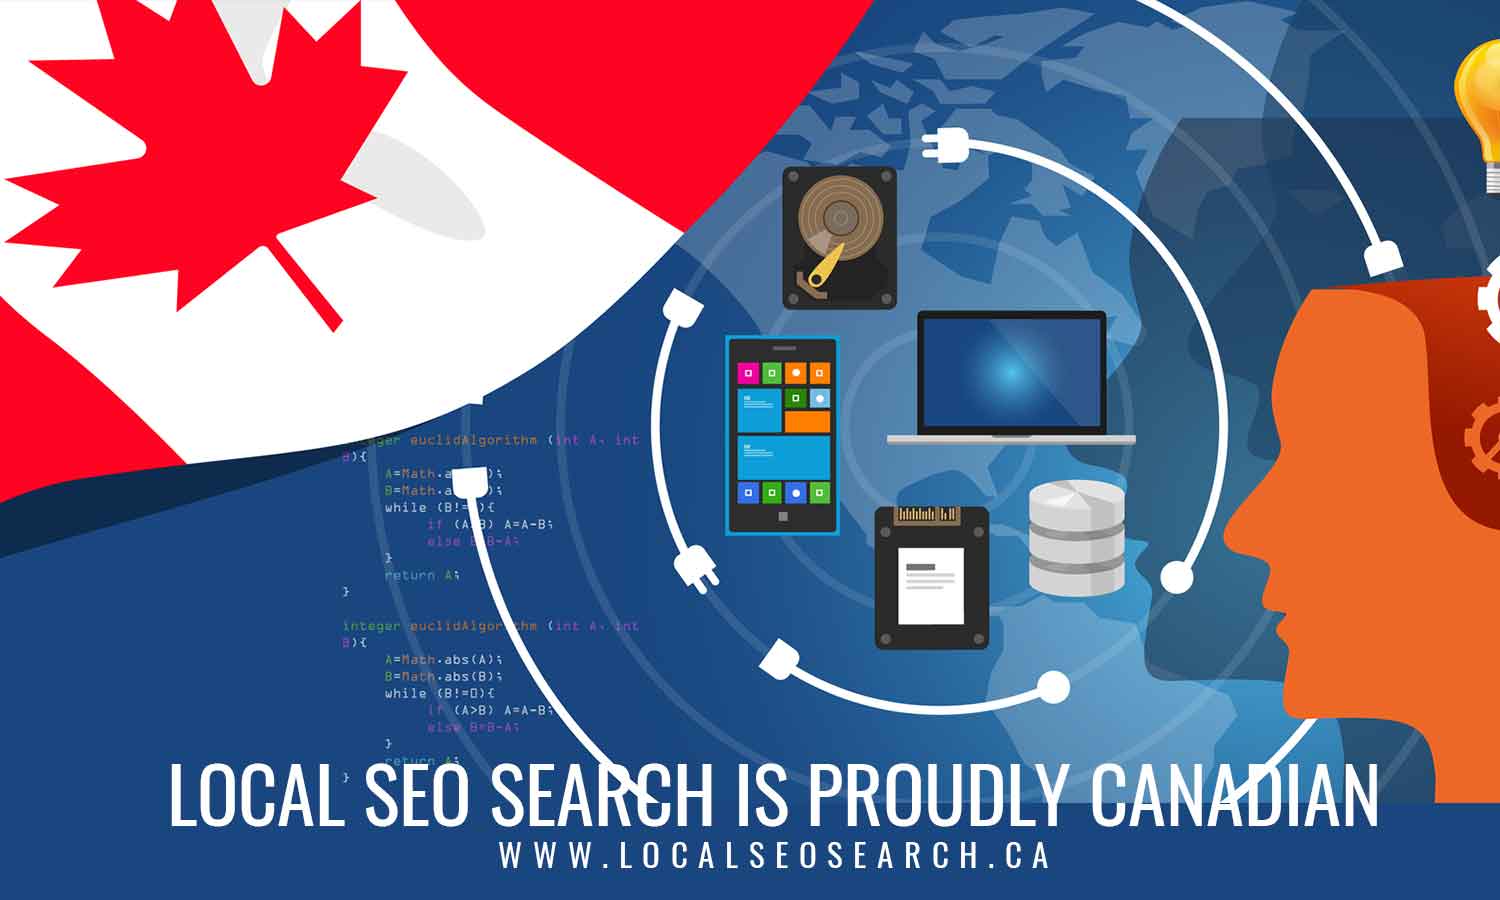 Local SEO Search is proudly Canadian